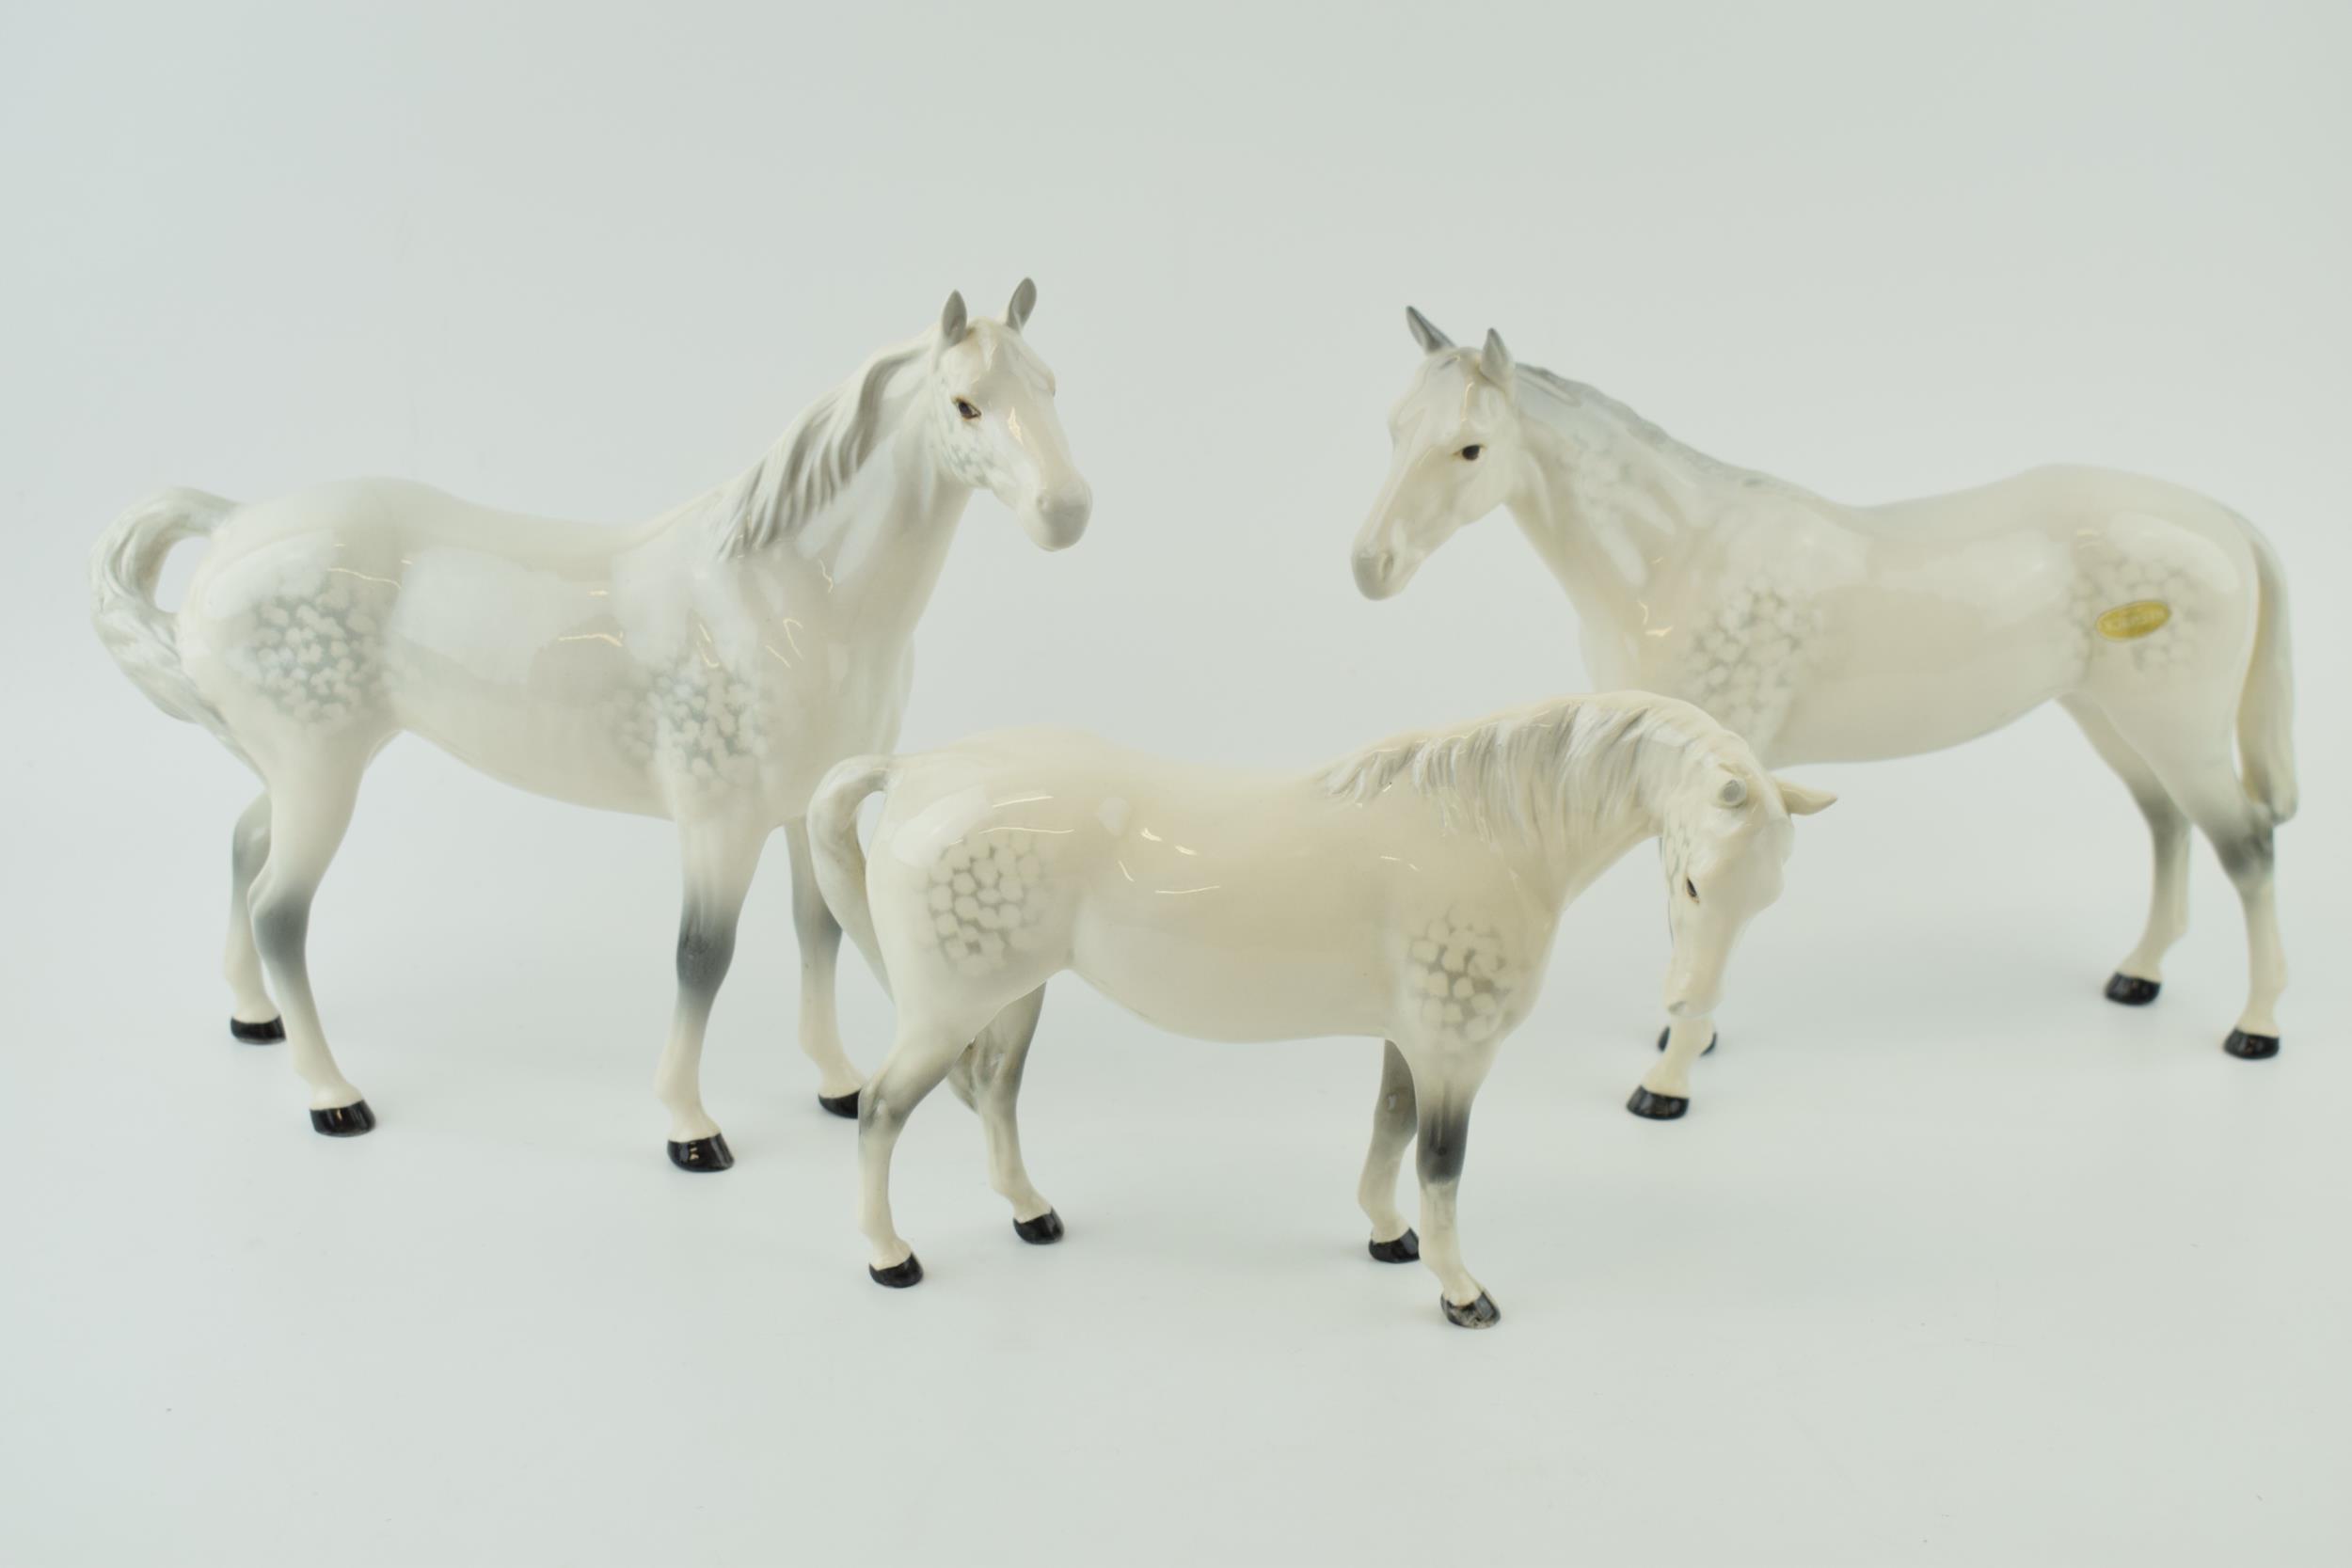 Beswick grey imperial with grey swishtrail and grey mare facing right (3). In good condition with no